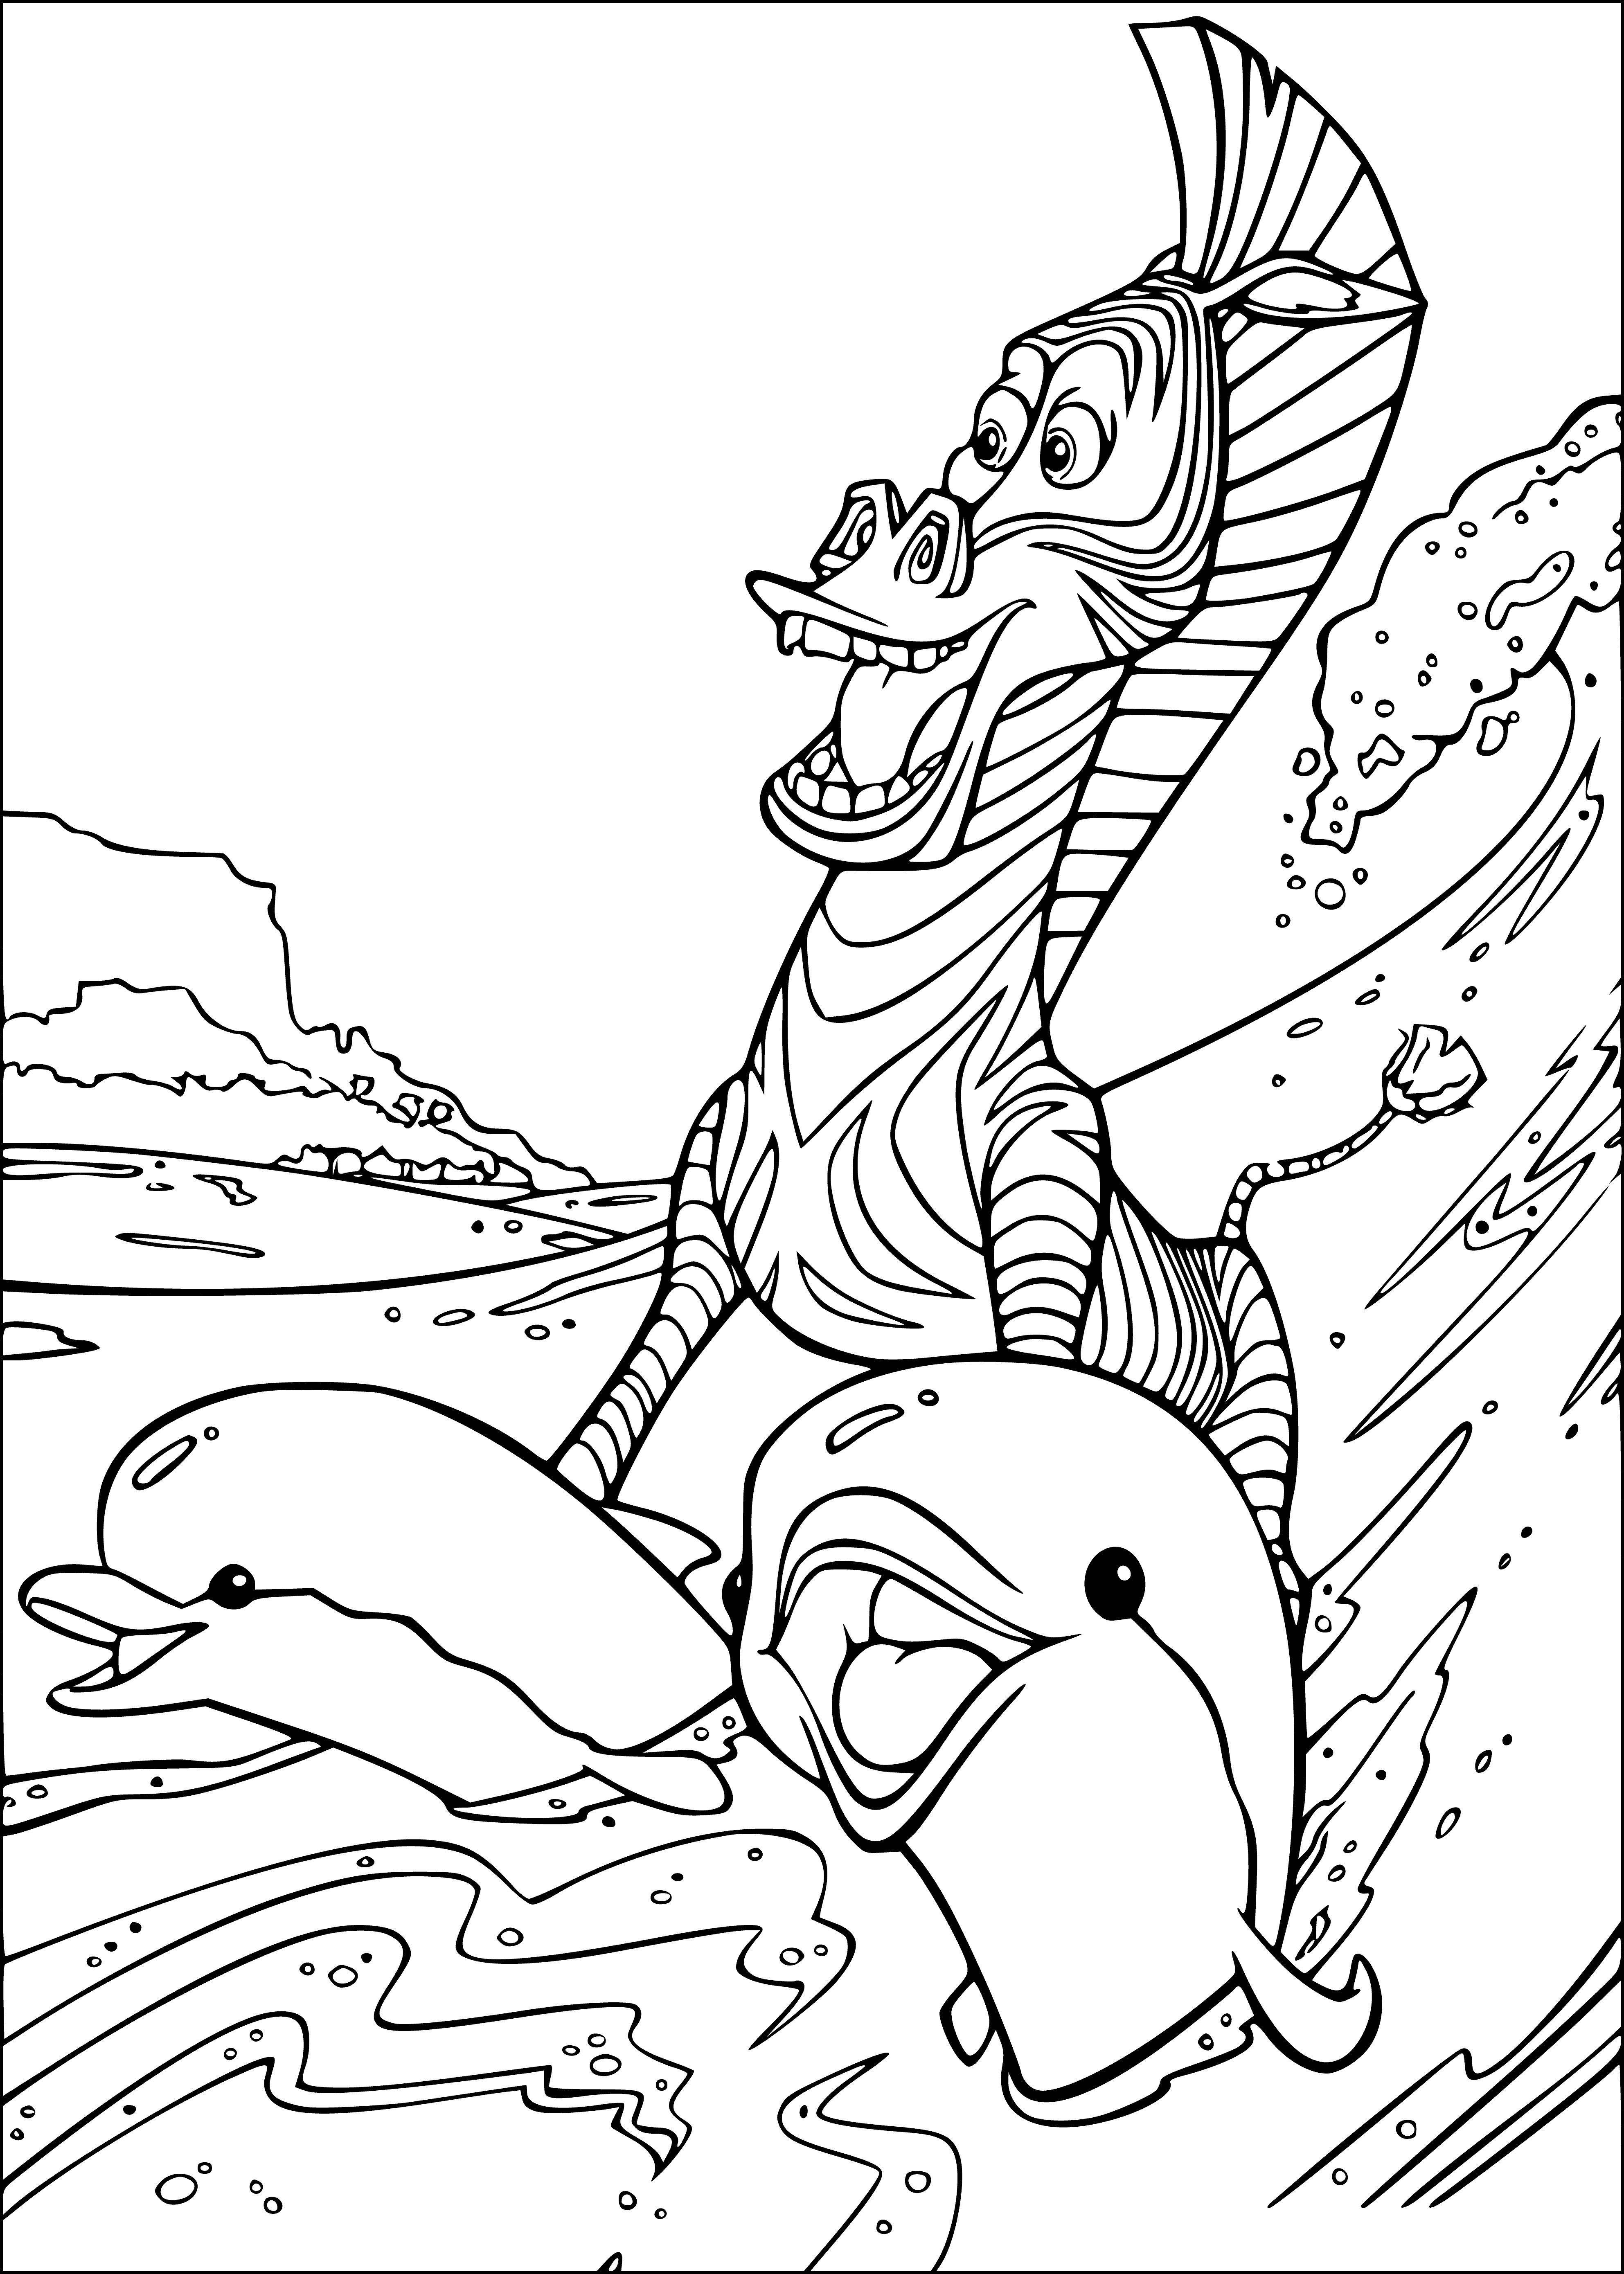 Marty and the Dolphins coloring page